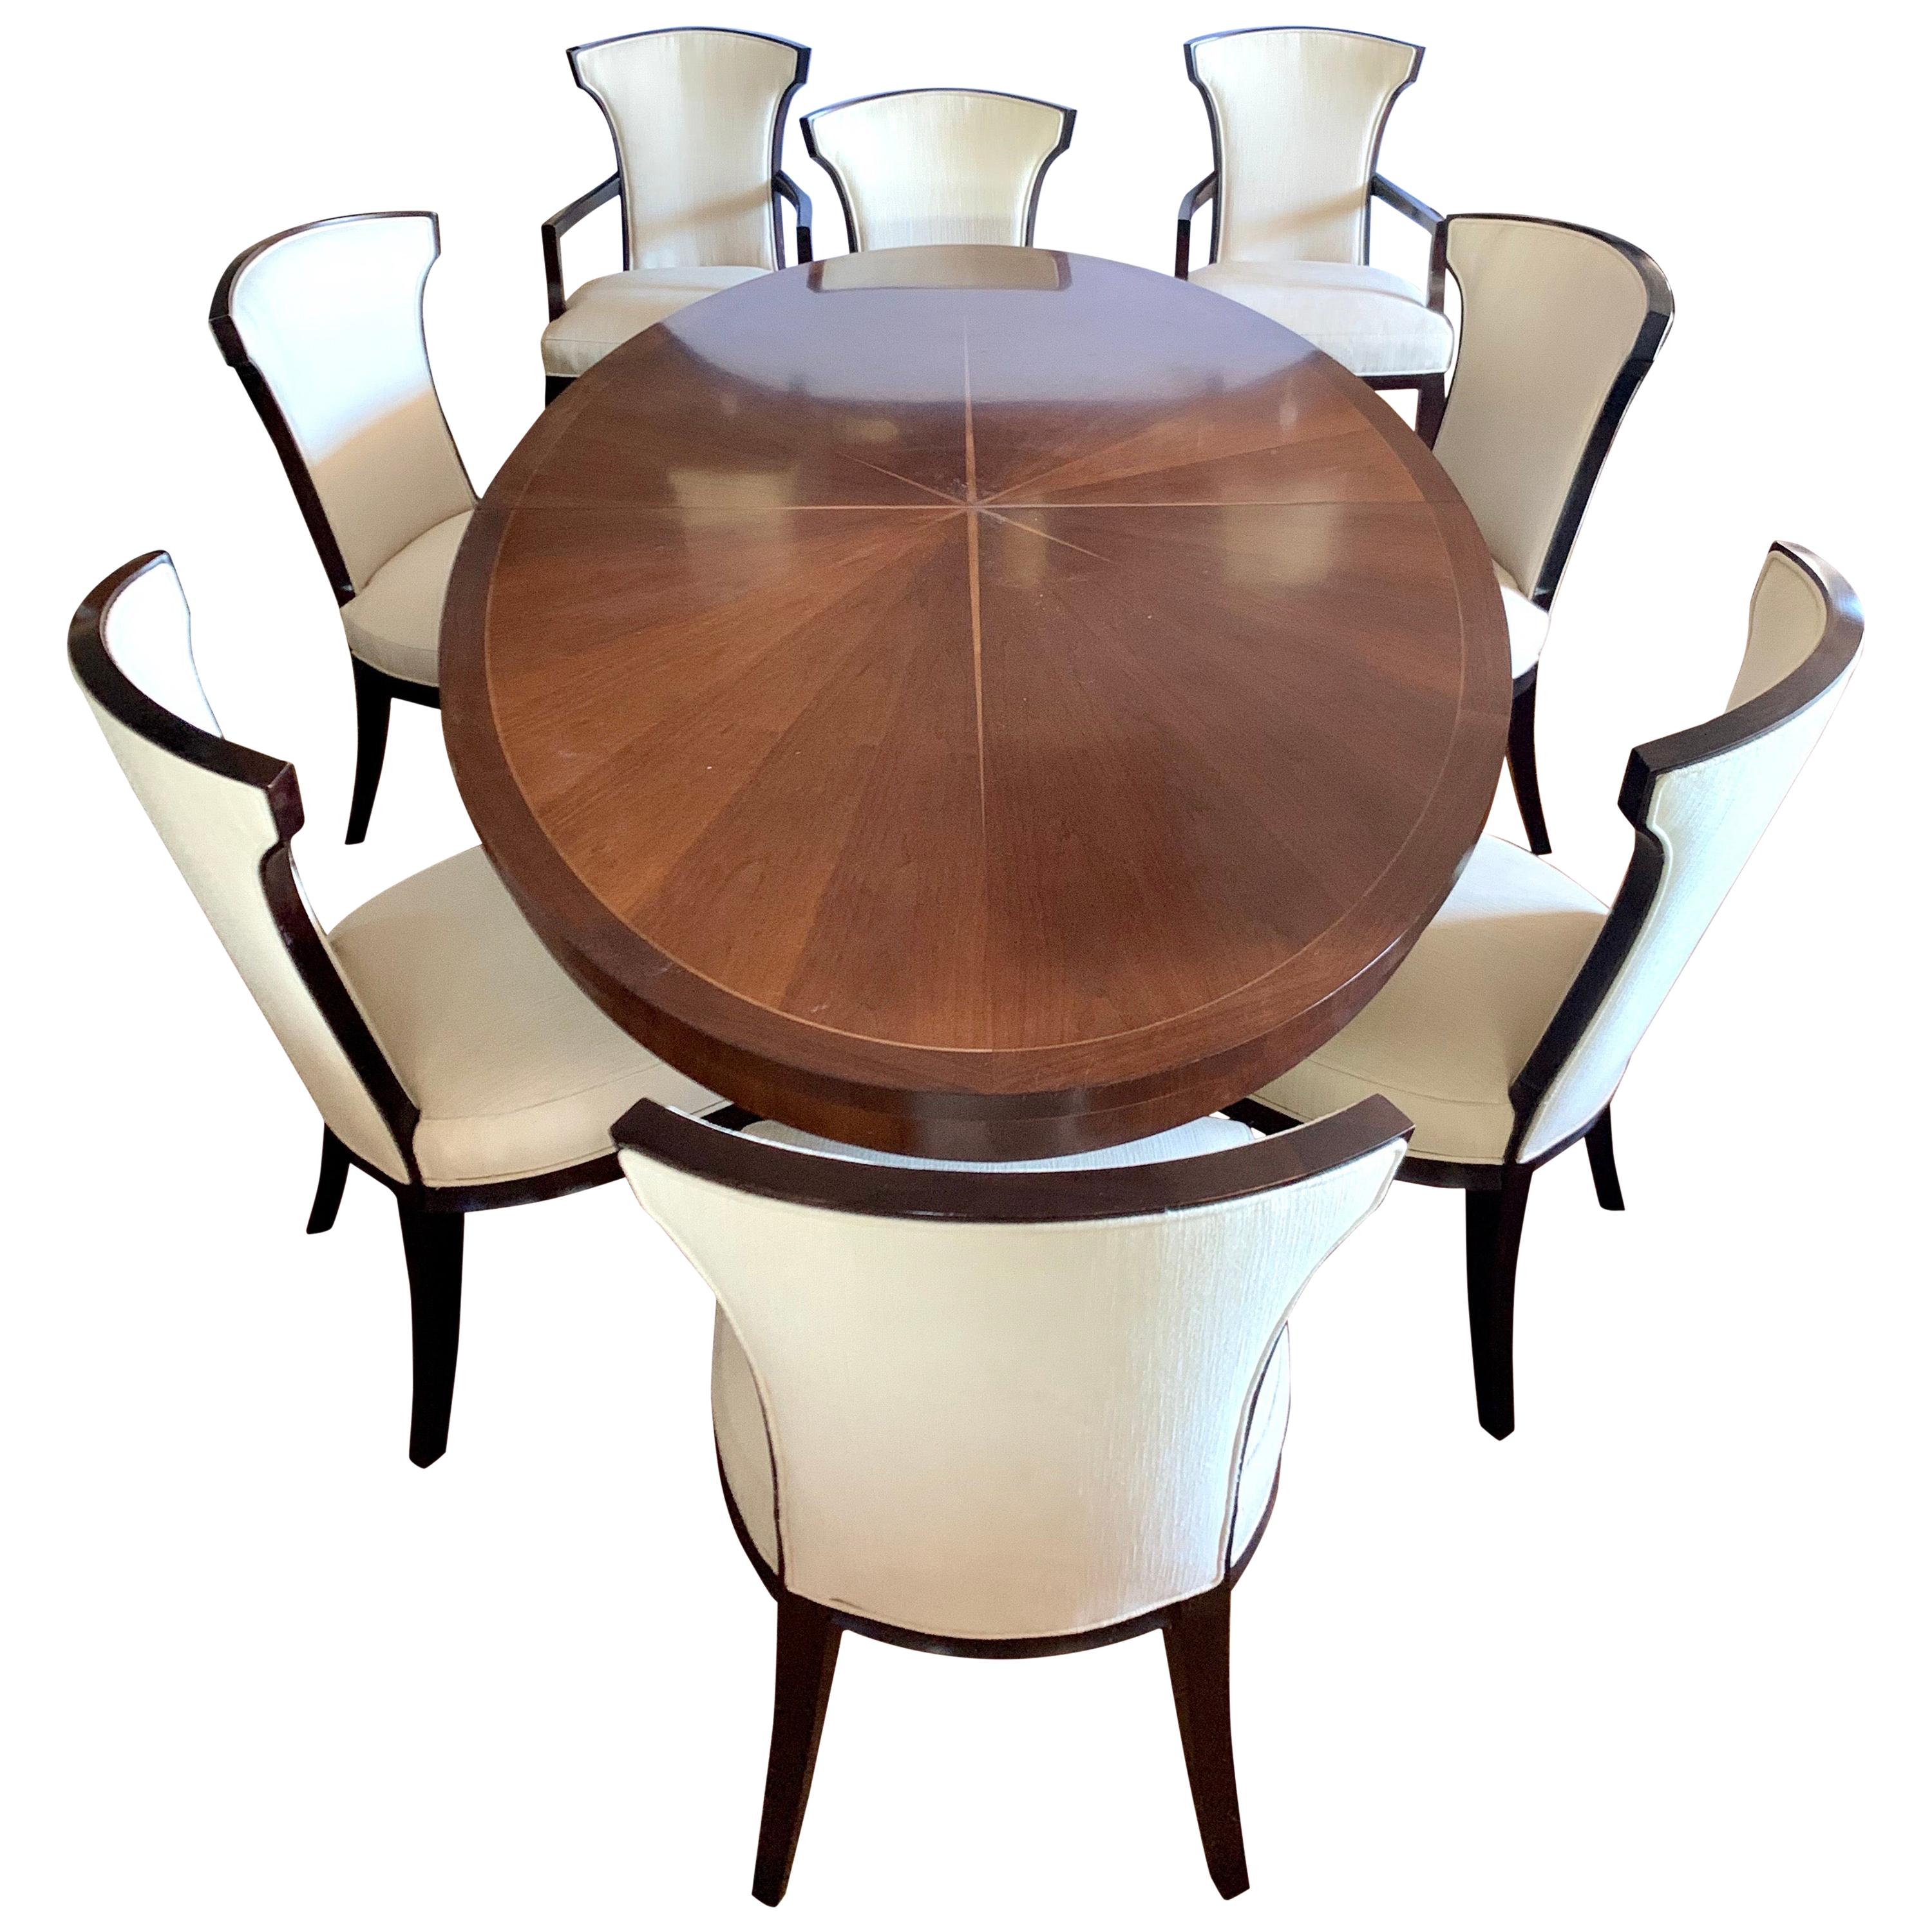 Barbara Barry for Henredon Celestial Dining Room Nine-Piece Set Table 8 Chairs